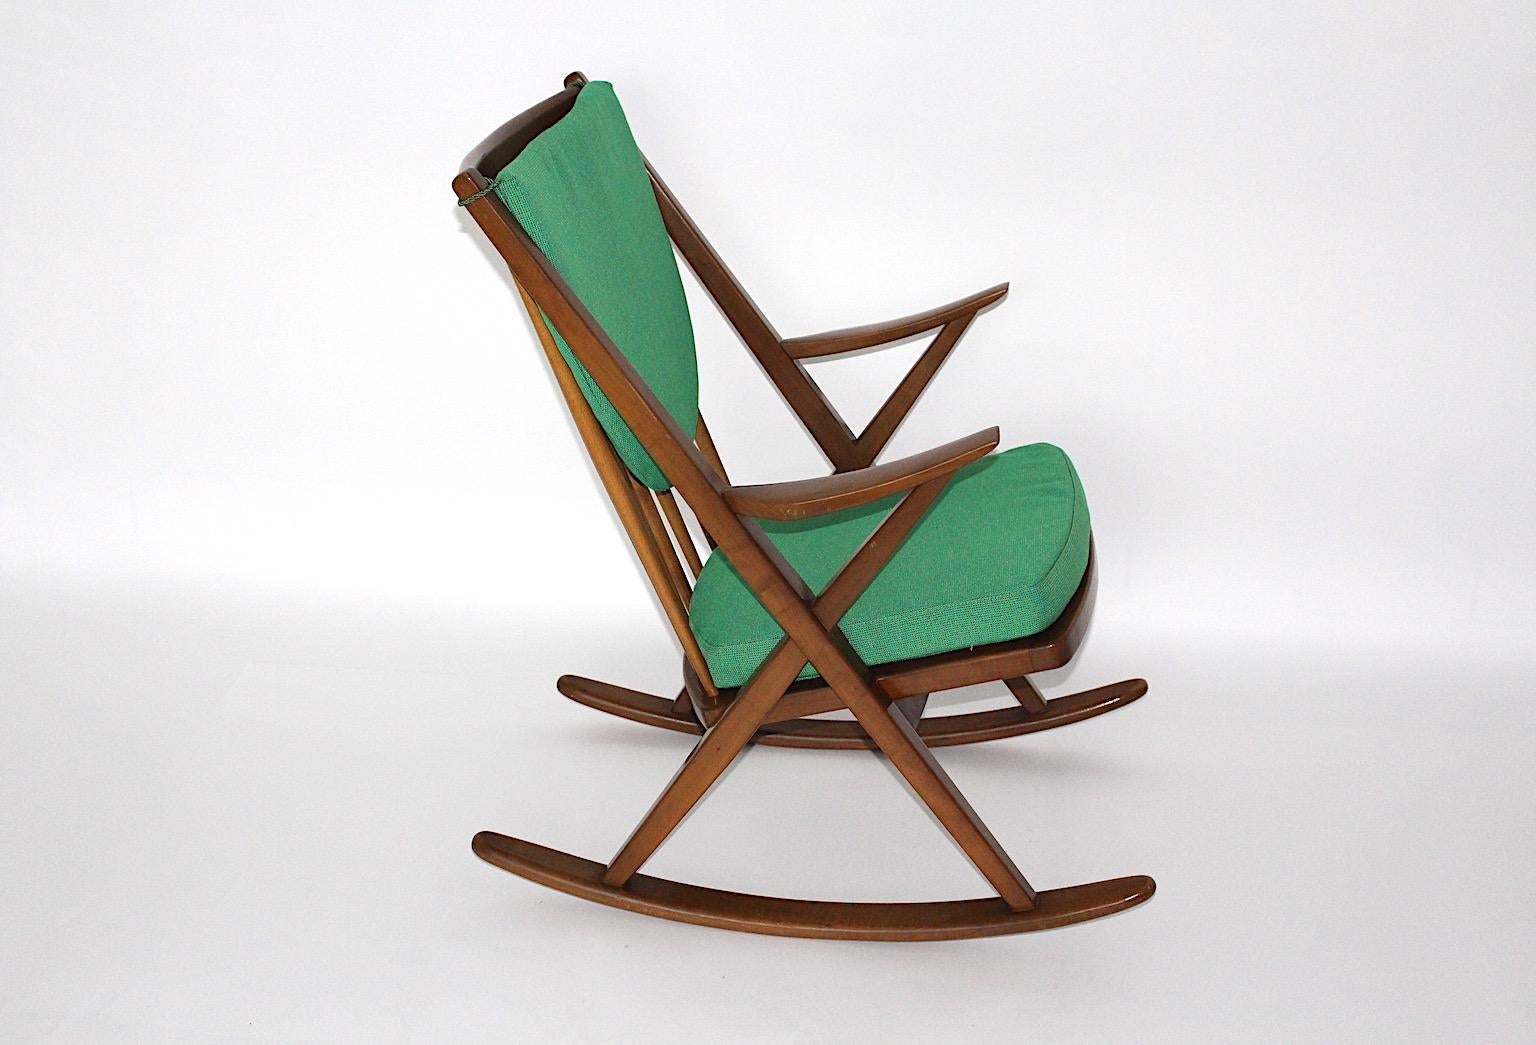 Scandinavian Modern vintage rocking chairs from beech with renewed green loose cushions by Frank Reenskaug from Bramin Mobler  circa 1960 Denmark.
A fabulous duo rocking chairs from beech in a warm brown color and renewed loose cushions from green